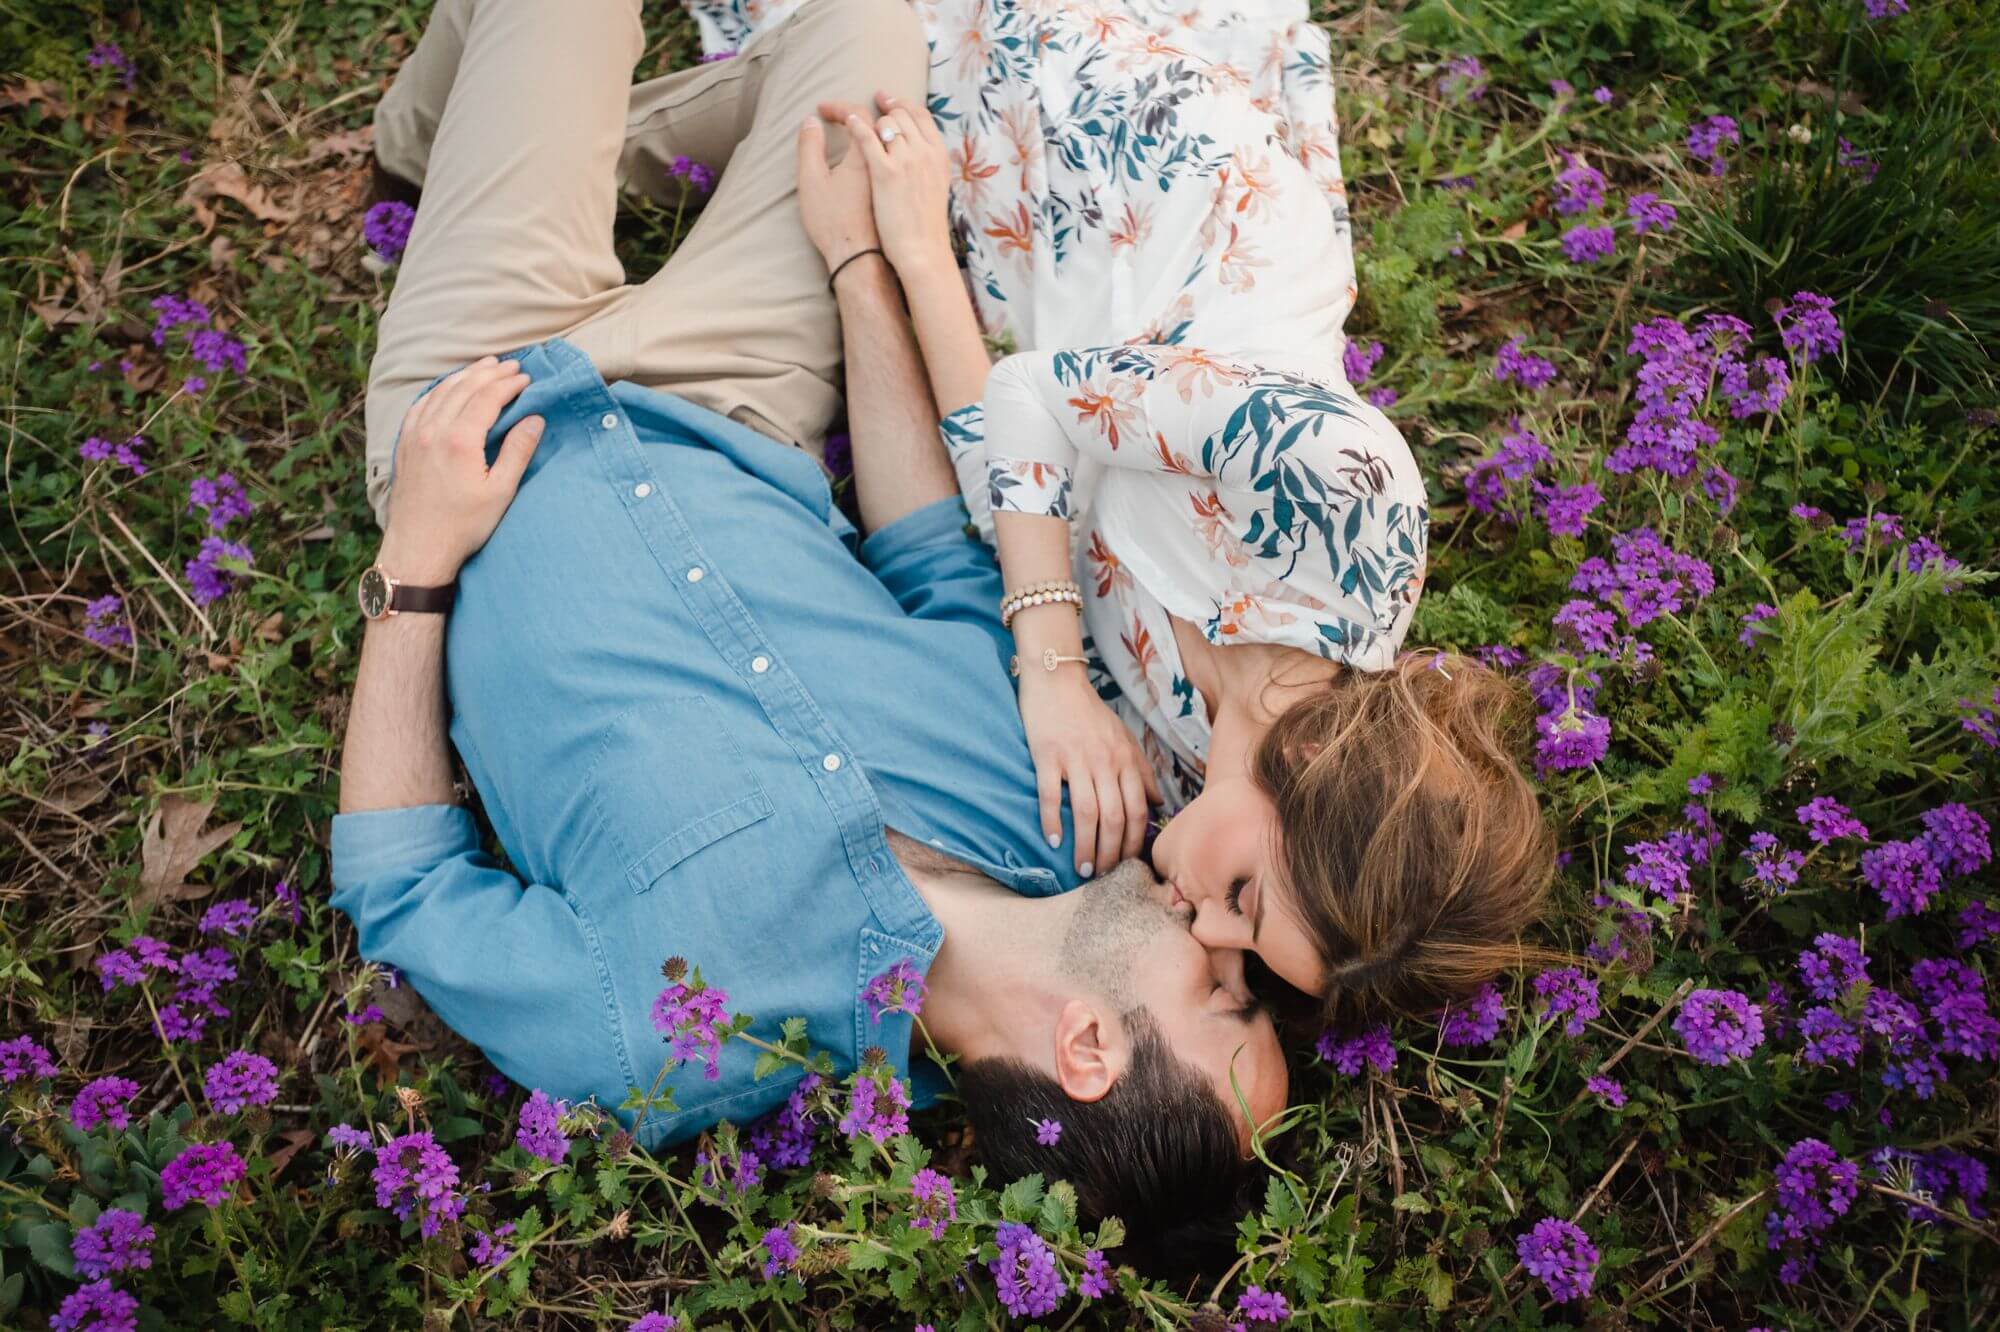 Ivy Place engagement photos